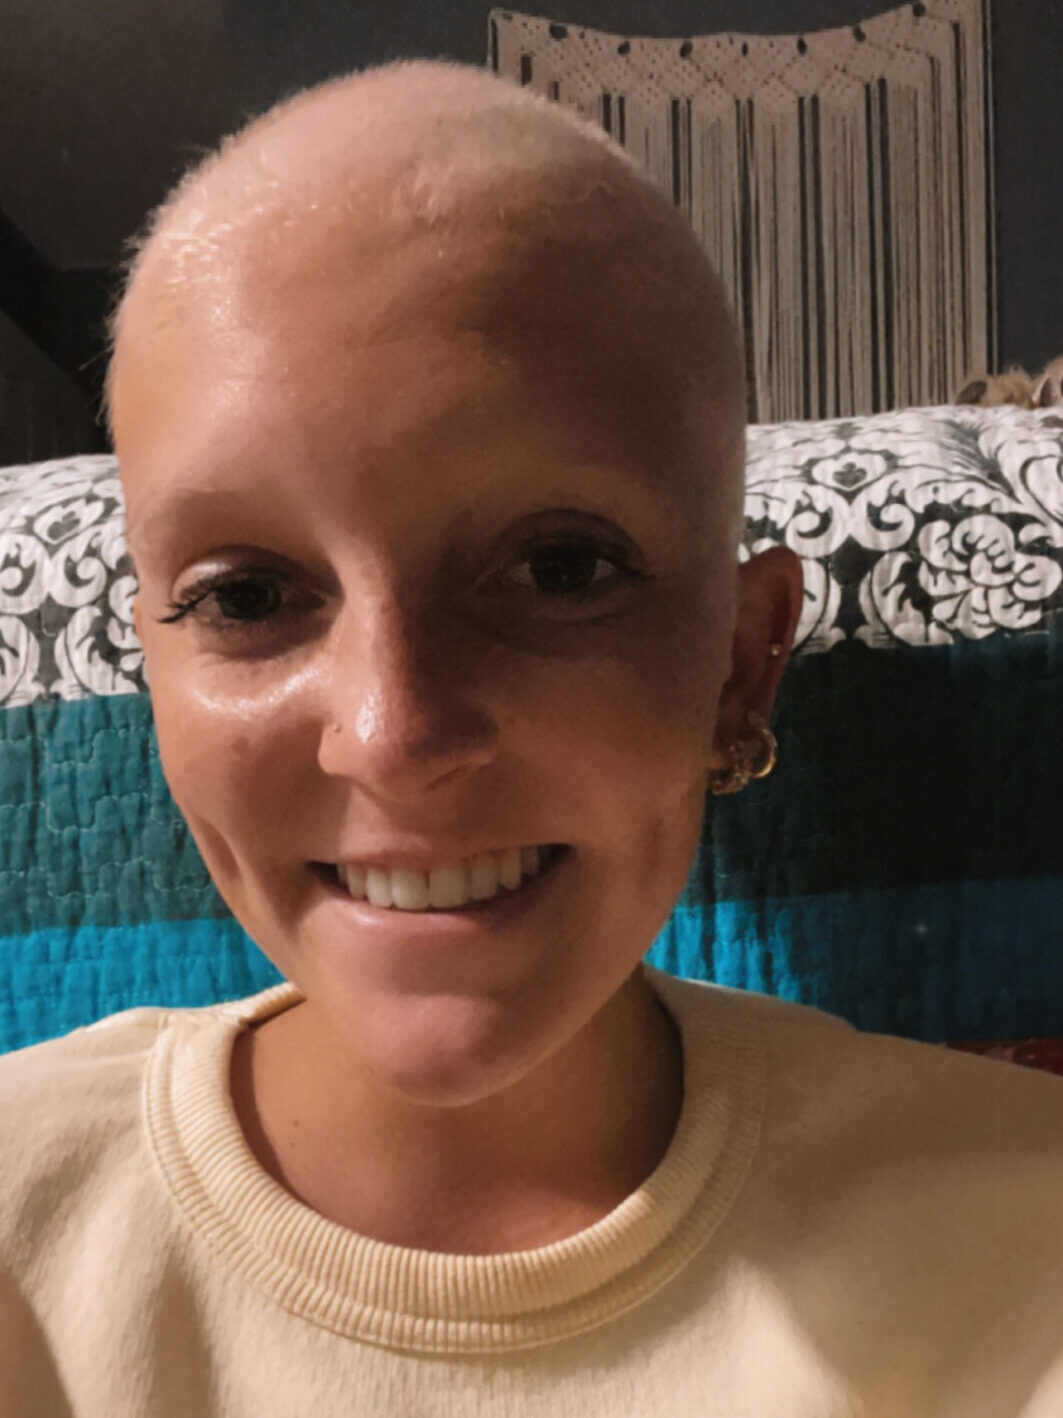 Sammie discusses hair loss from chemo